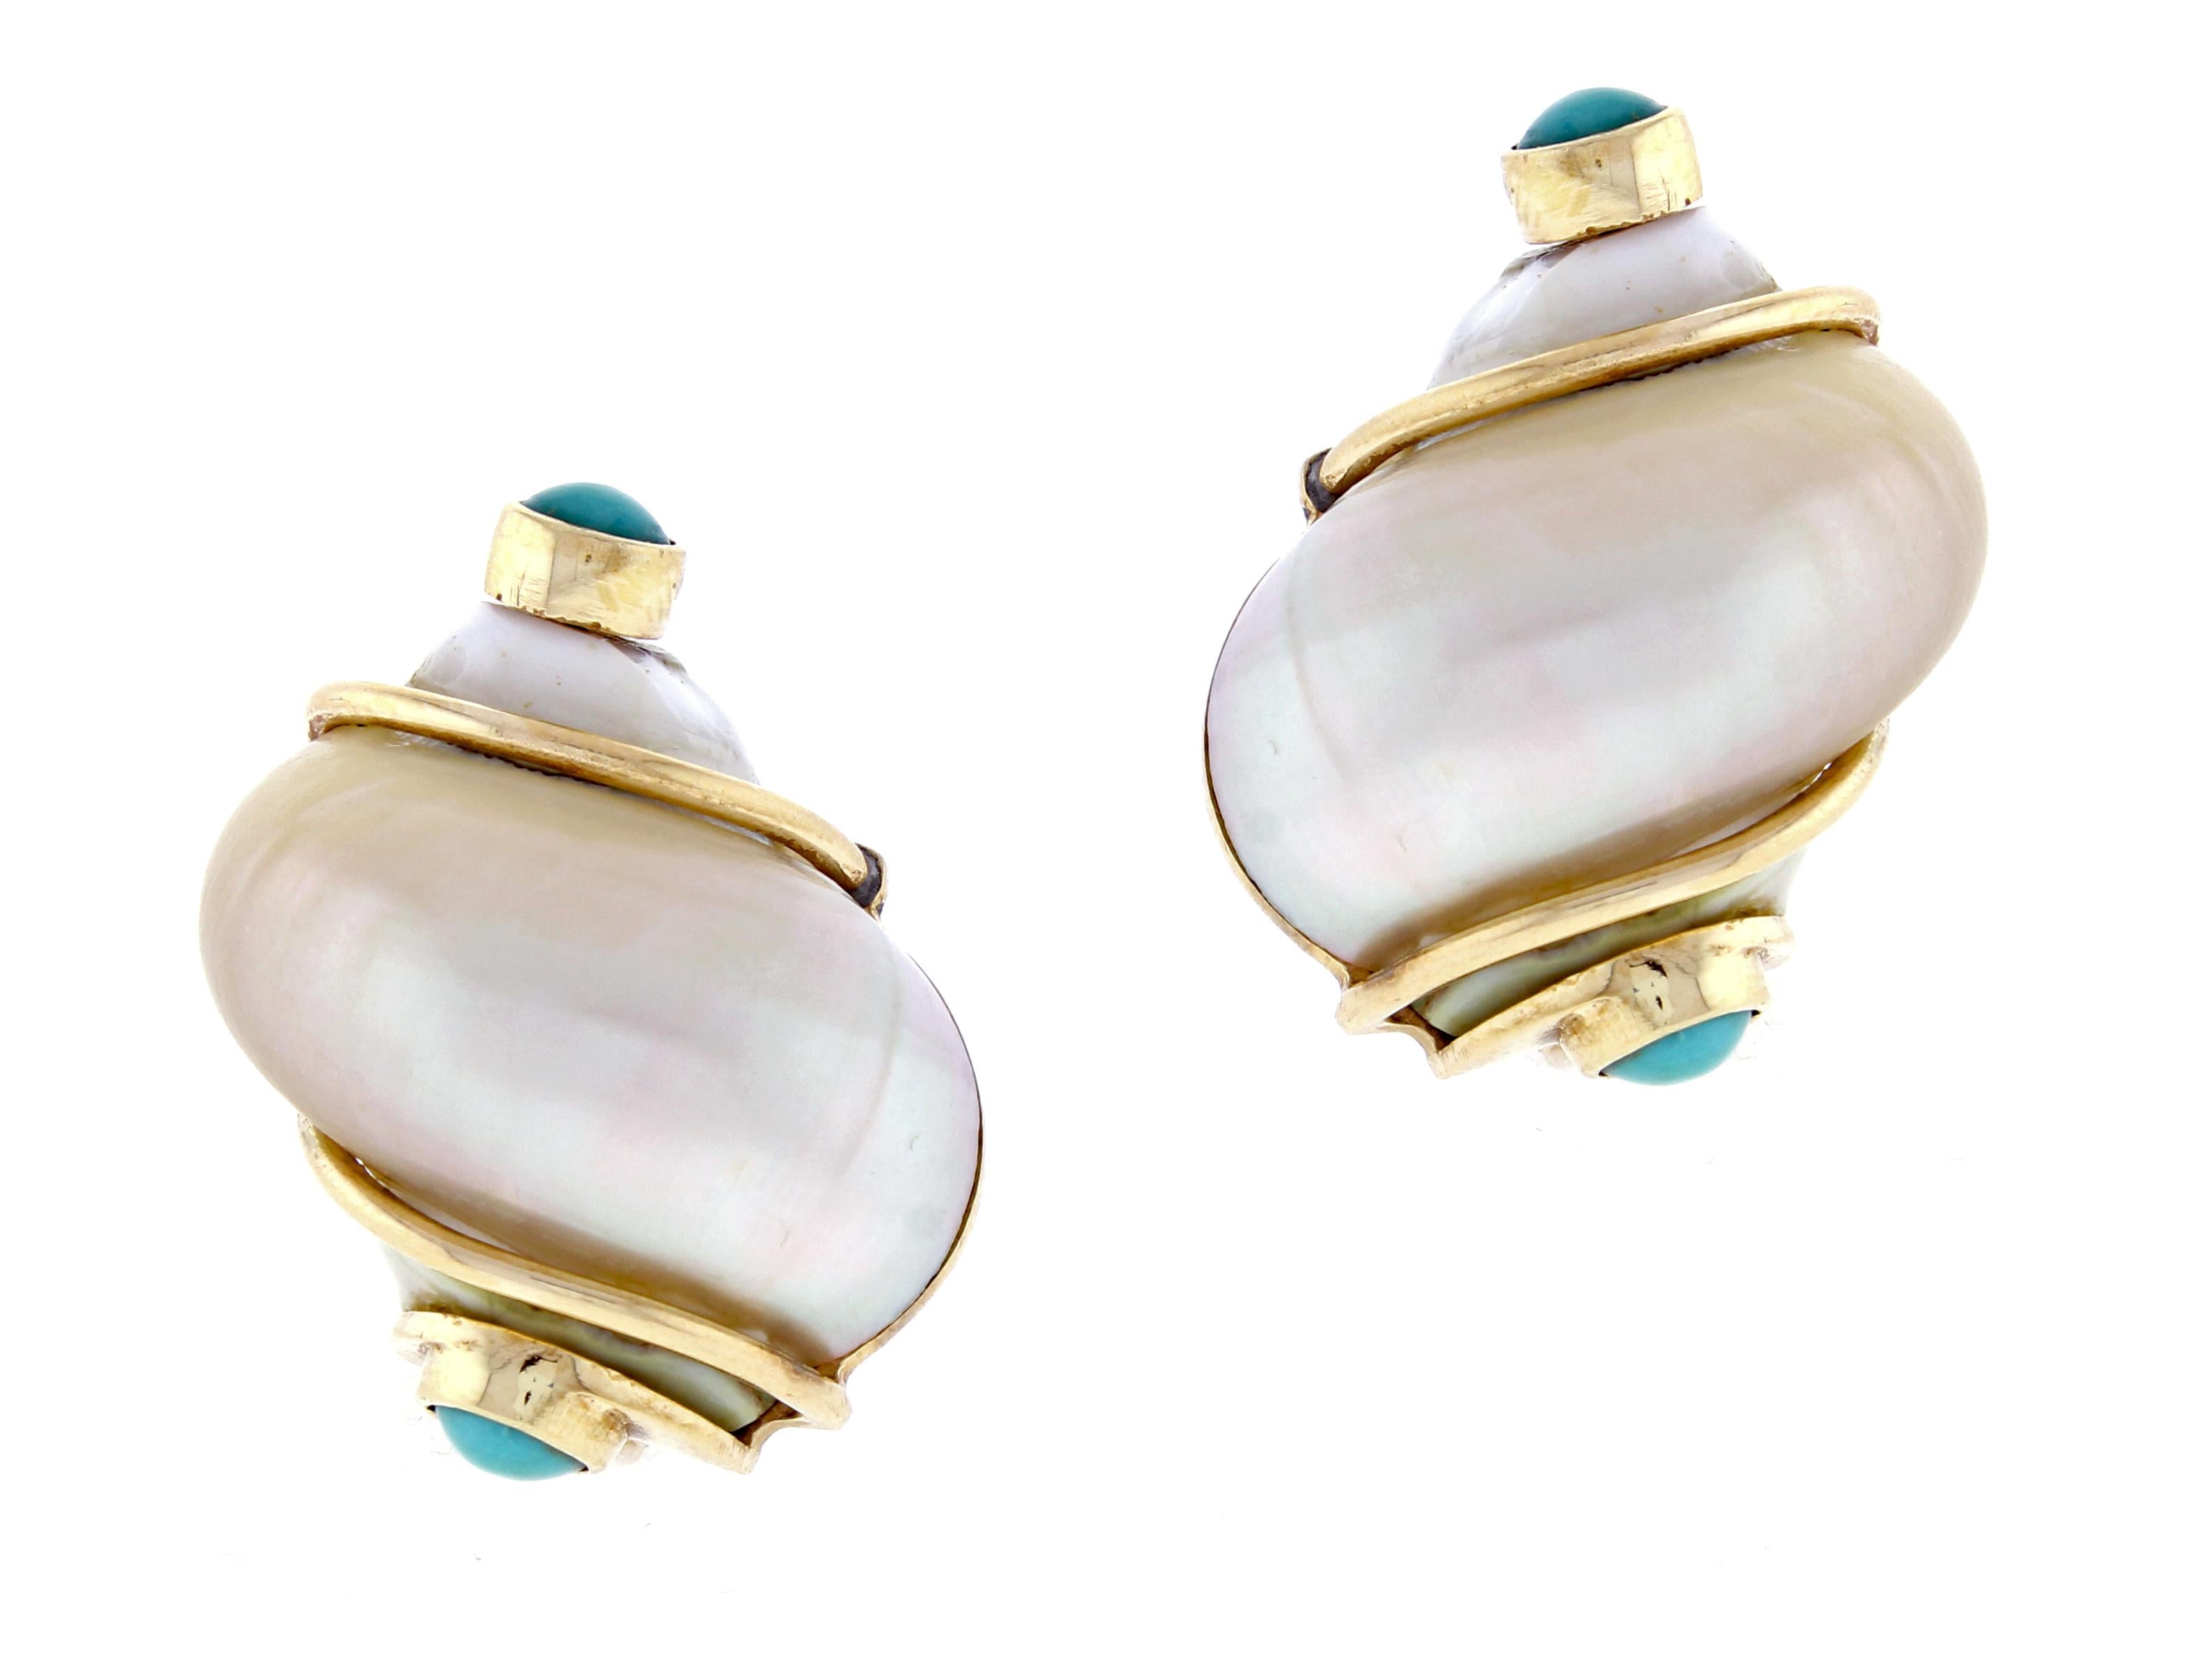  From Seaman Scheps, a pair of 14 karat yellow gold, turbo shell and coral earrings. . Each set with a white turbo shell, terminating in a cabochon turquoise accented by gold wire. 29mm high